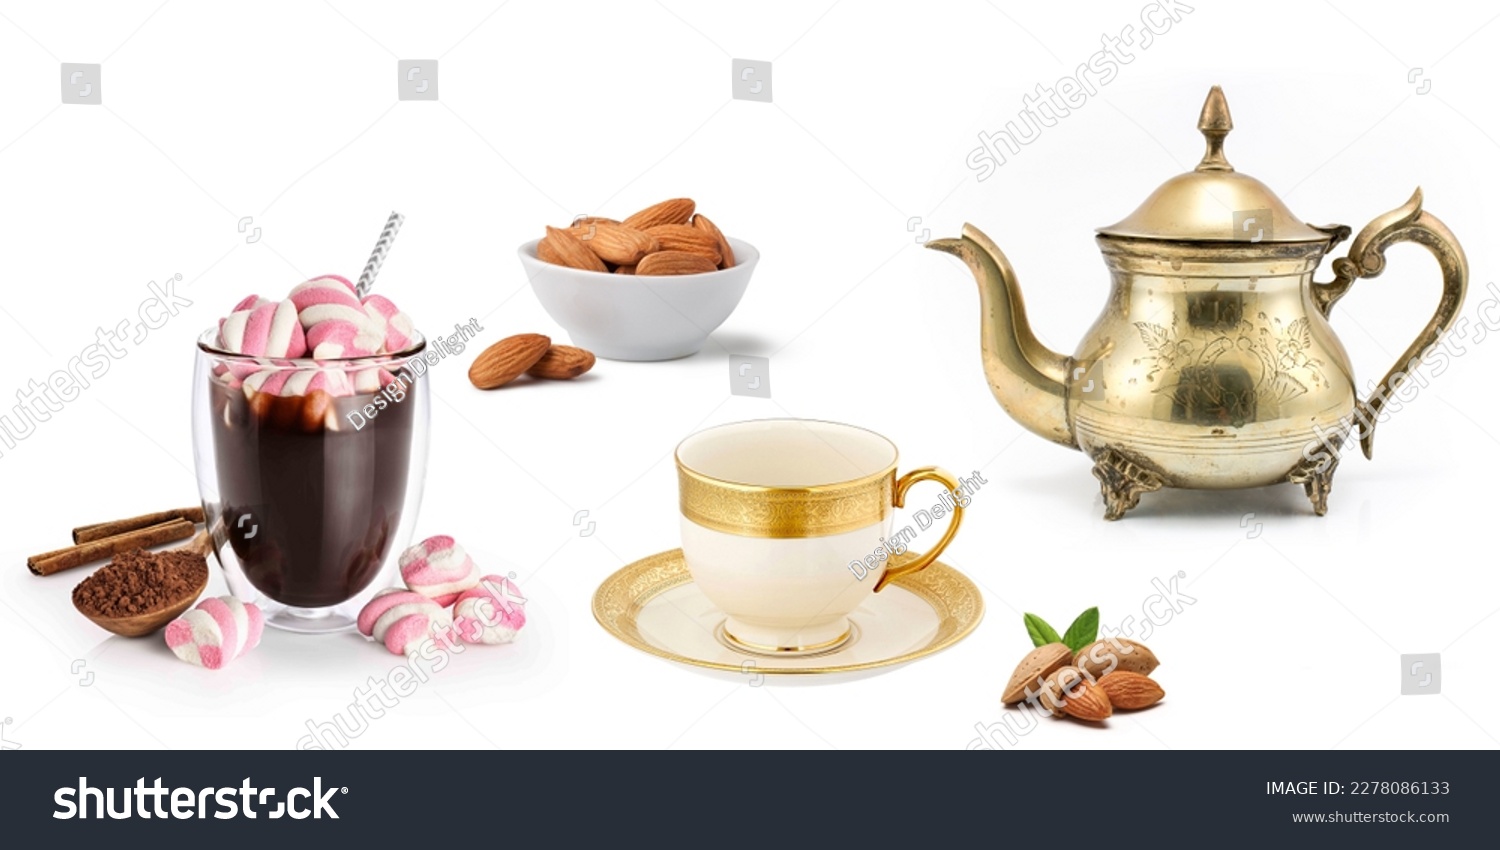 Colorful digital wall tiles design for kitchen, design set of elegant and traditional teapot colorful white gold coffee Tea cup on cup's plate beside the hot tea pot. #2278086133